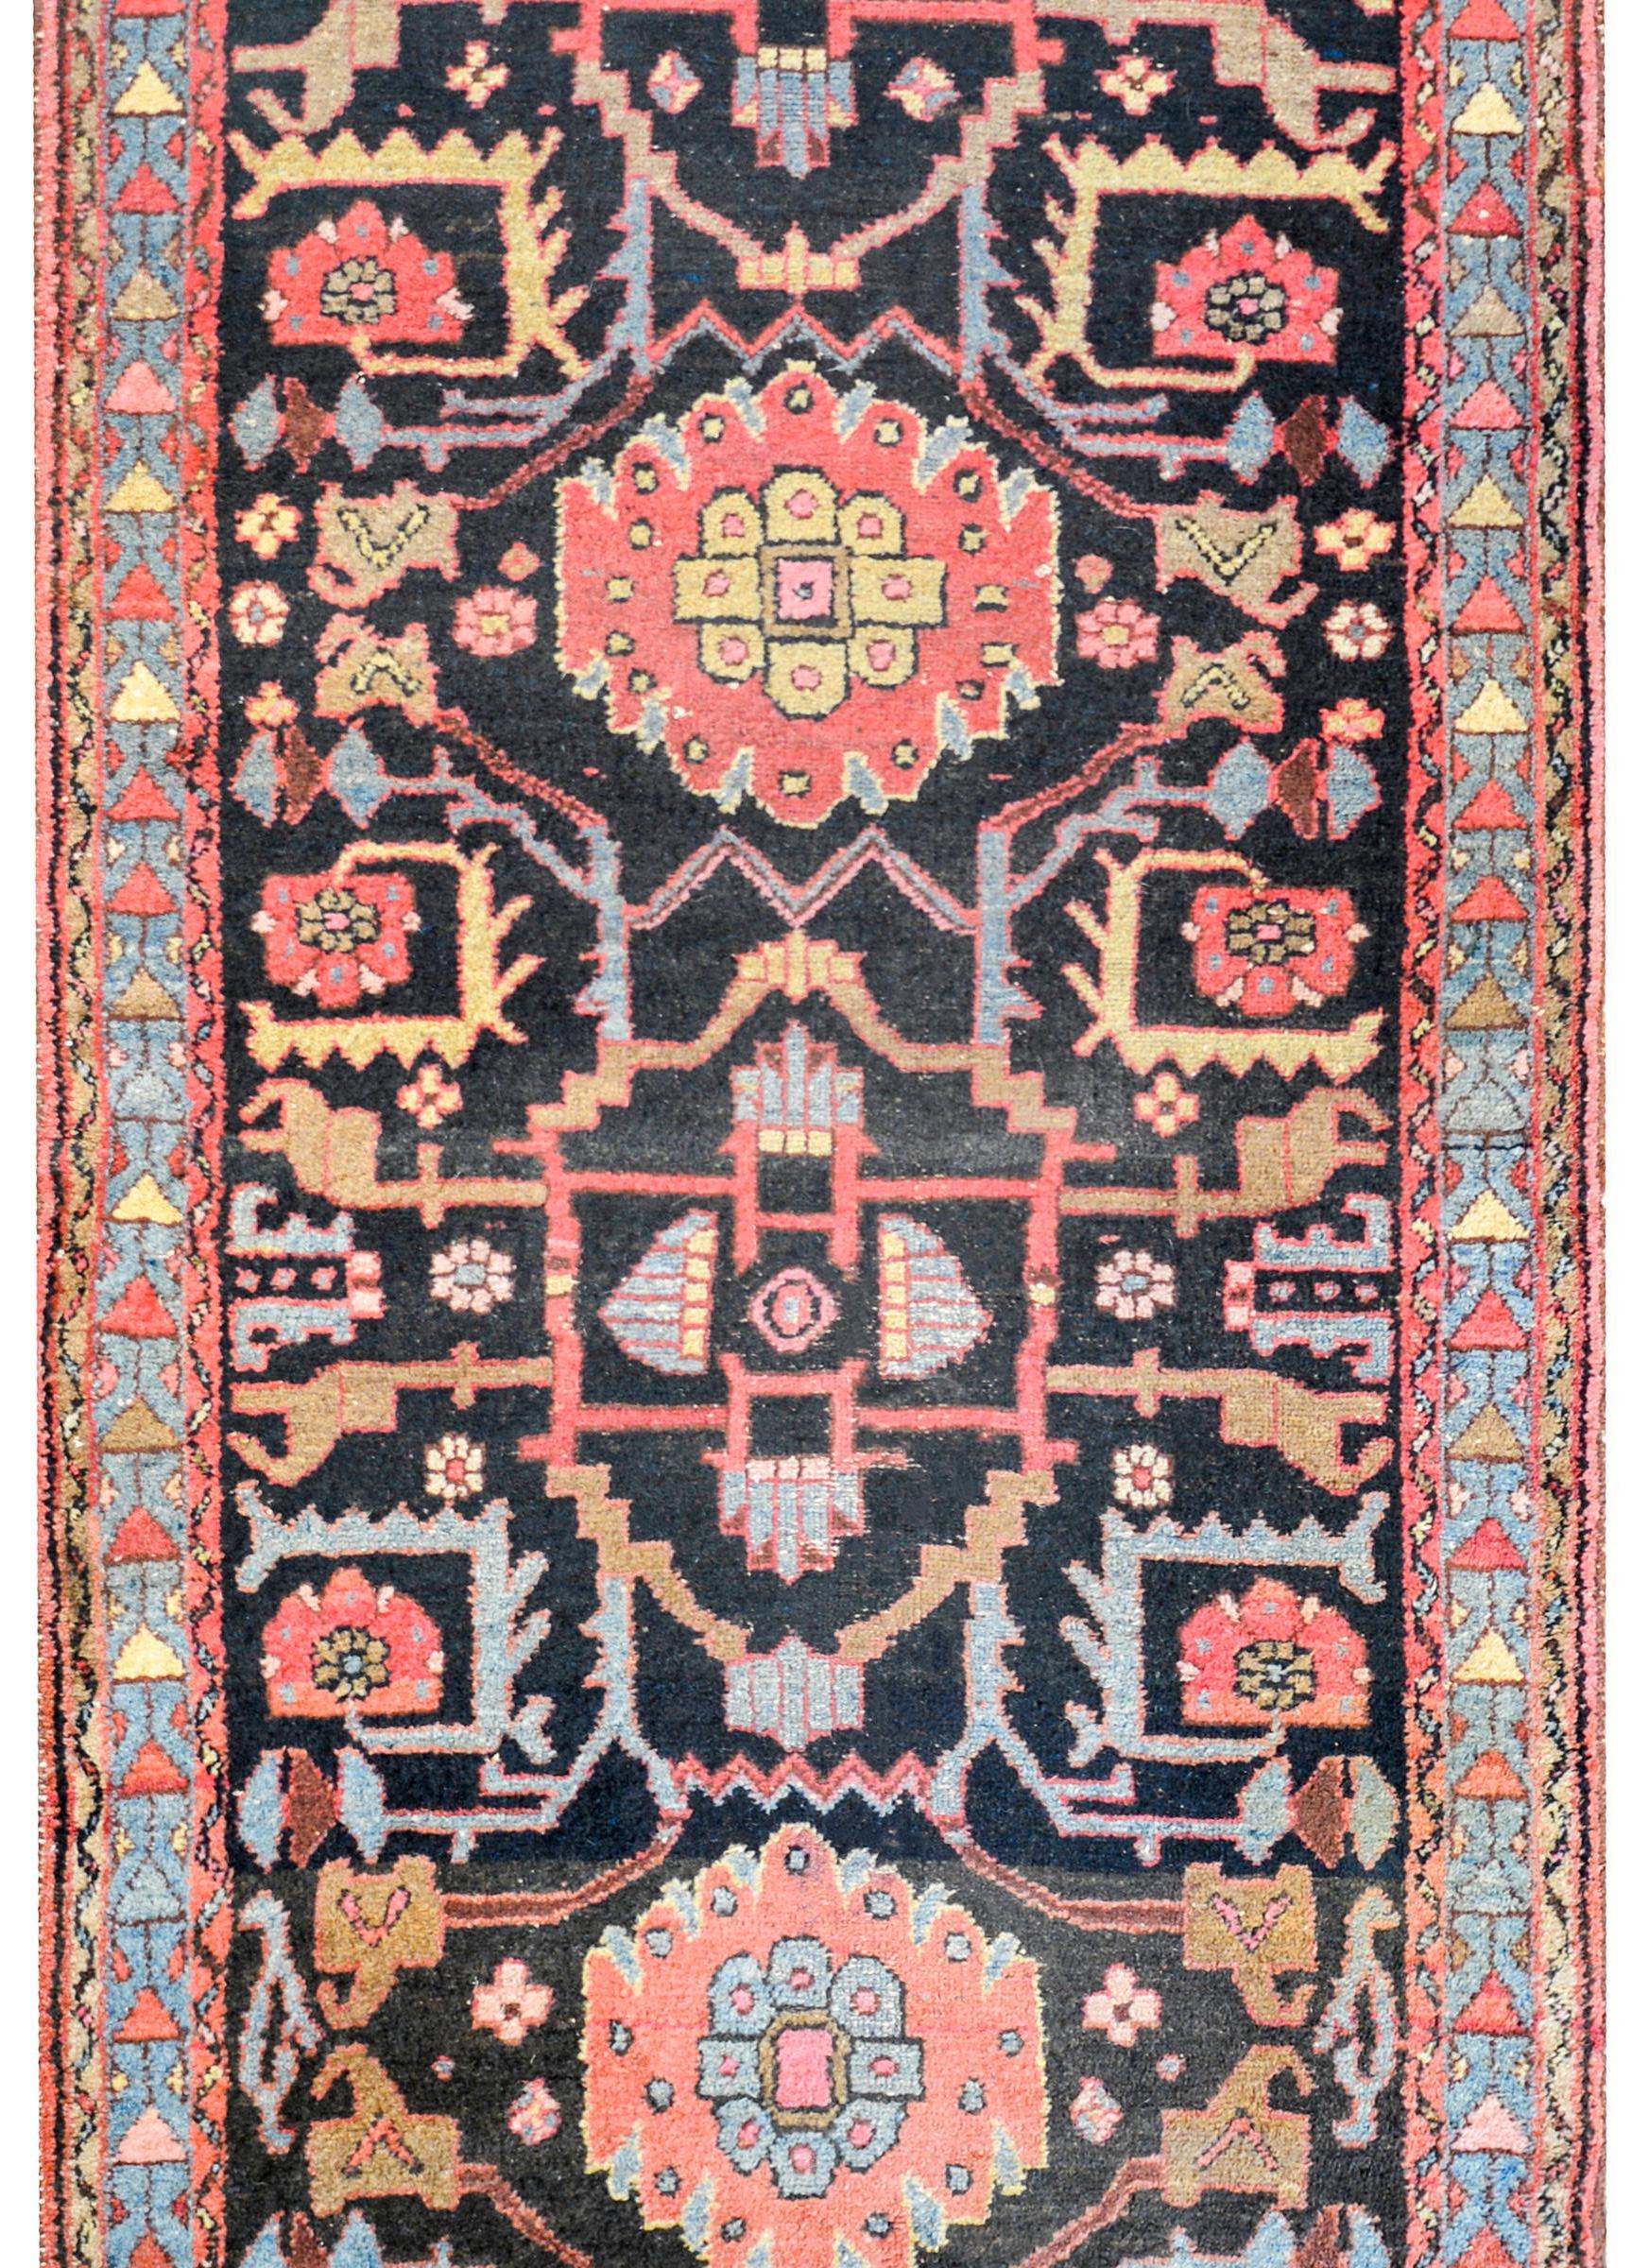 An early 20th century Persian Hamadan rug with a fantastic tribal pattern containing two large diamond floral medallions, on a black background, with stylized vine patterned motif. The border is wonderful with a triangle pattern on a light indigo